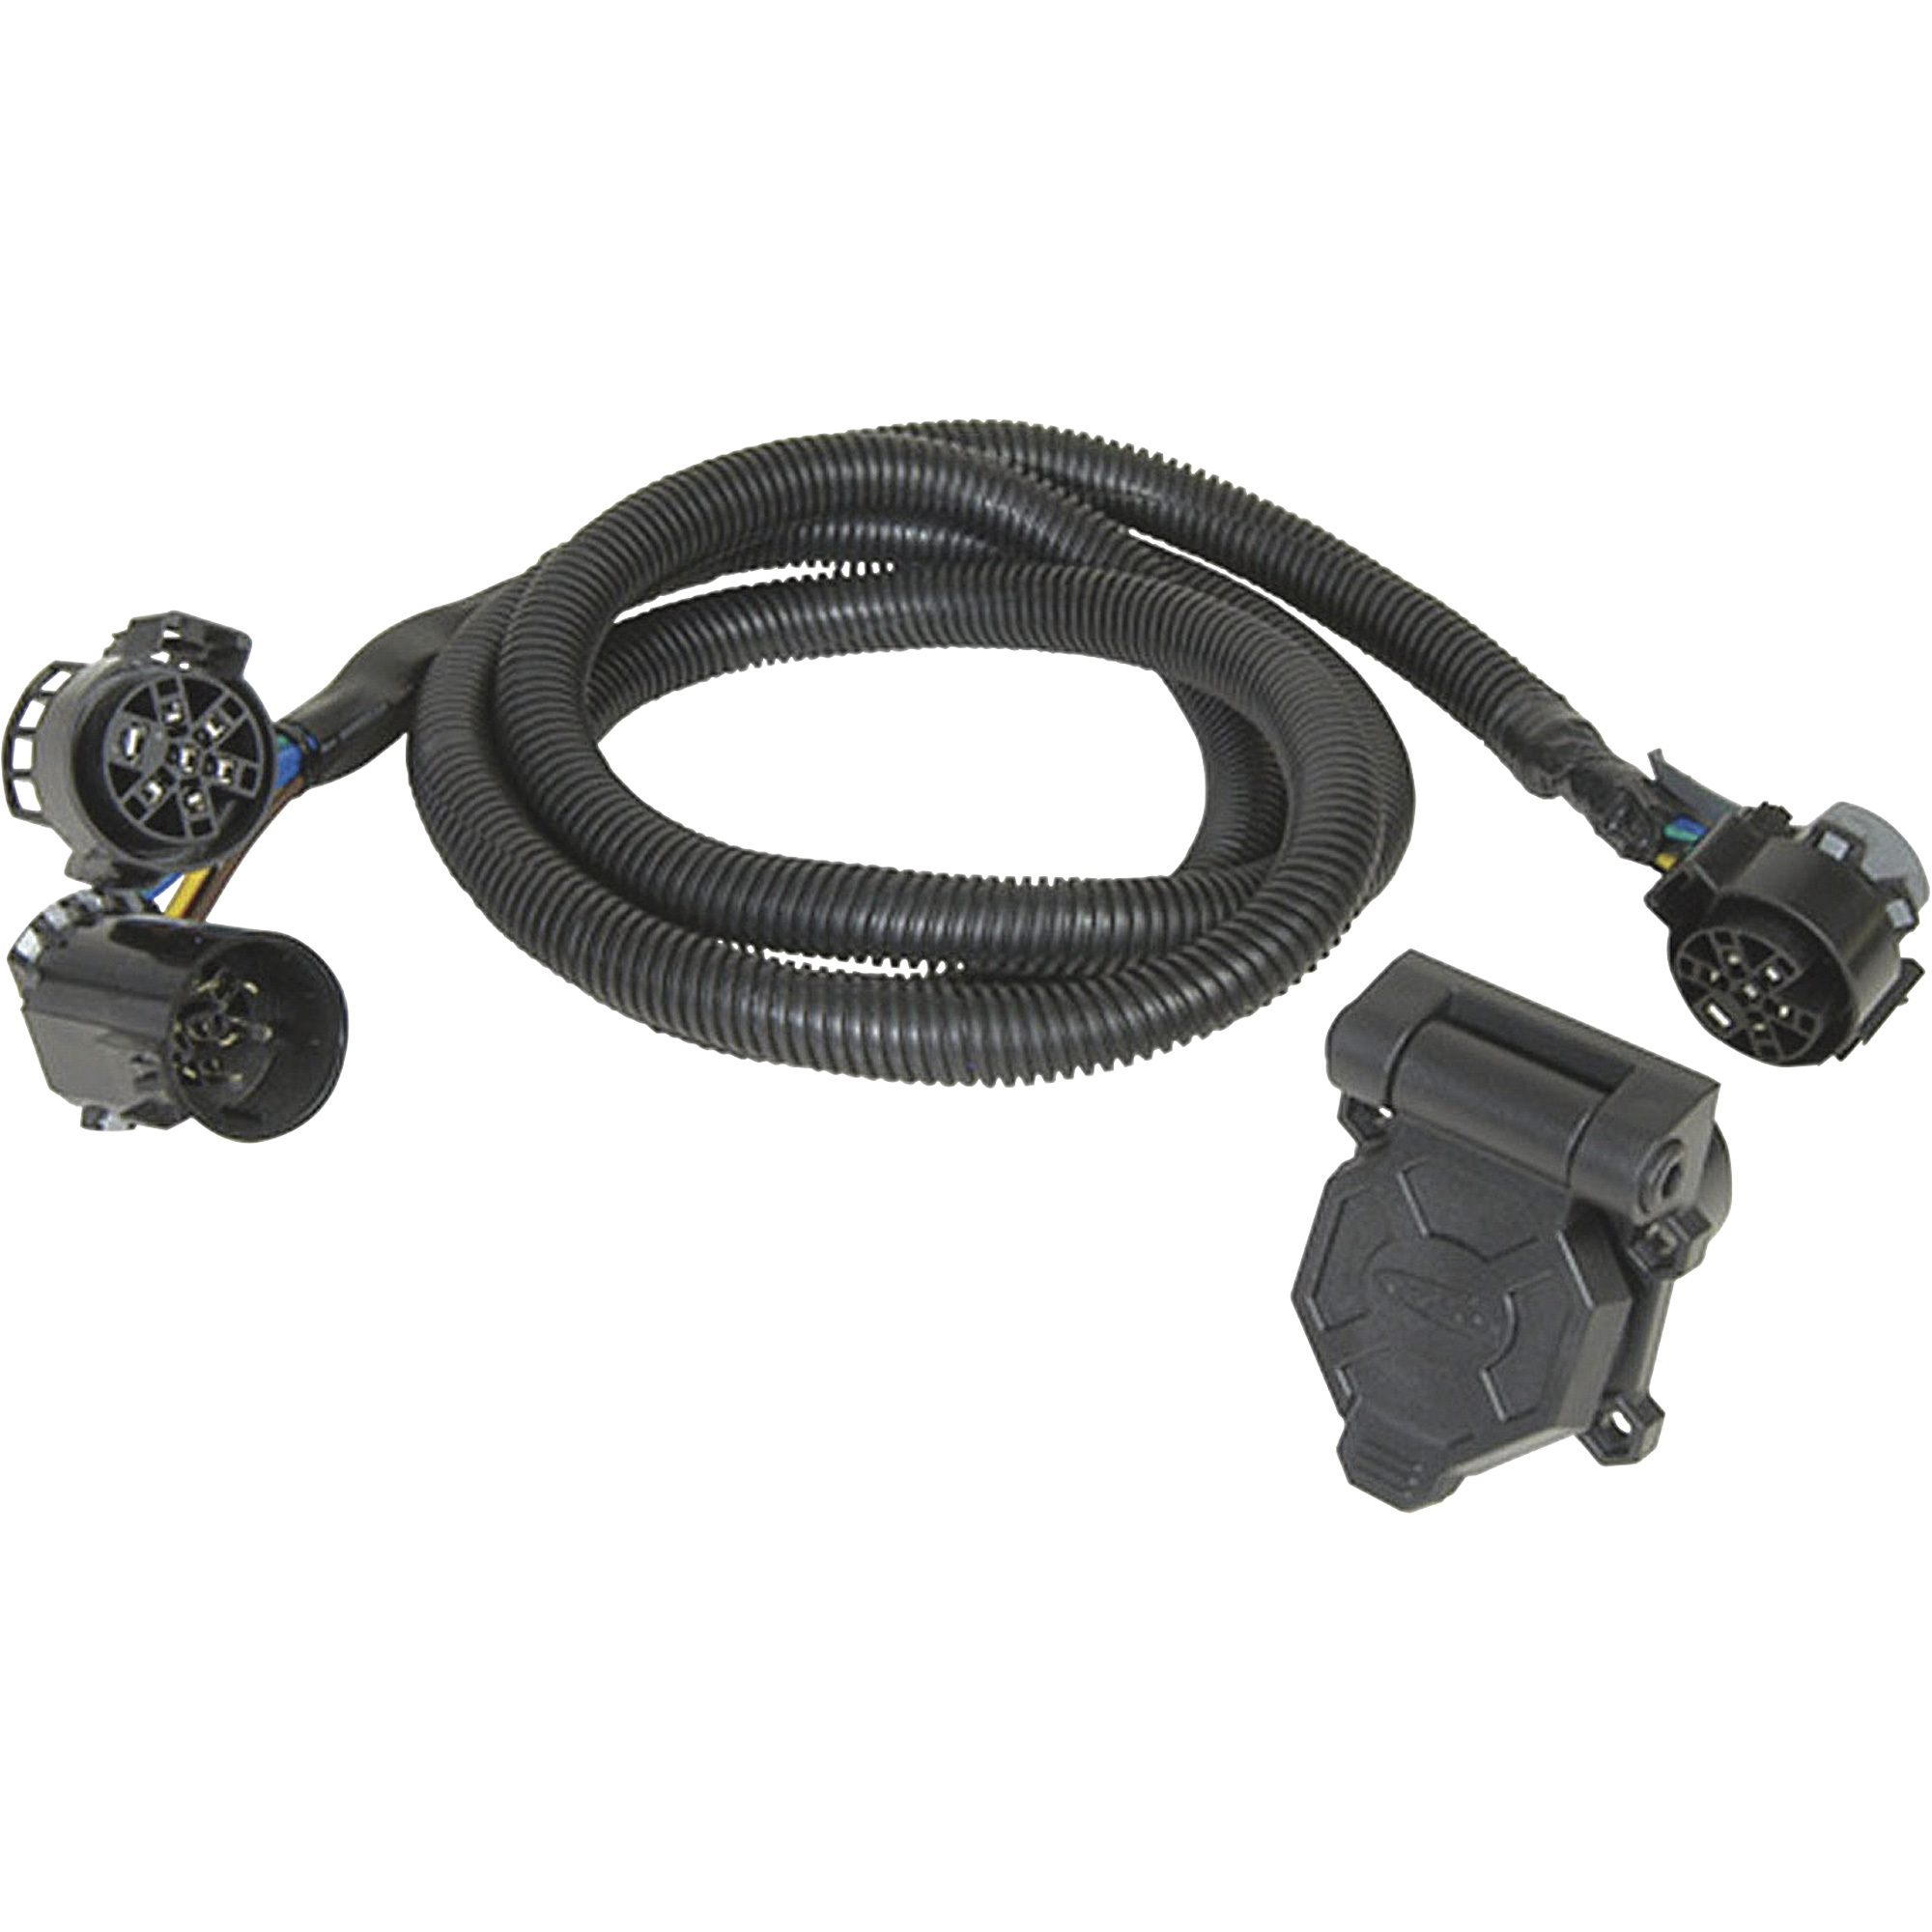 Hopkins Endurance 5th Wheel Wiring Kit - 7 Blade Connector, Fits Chev/GM 2000 to Current, Ford 2008 to Current, Nissan 2004 to Current, Ram 2010 to